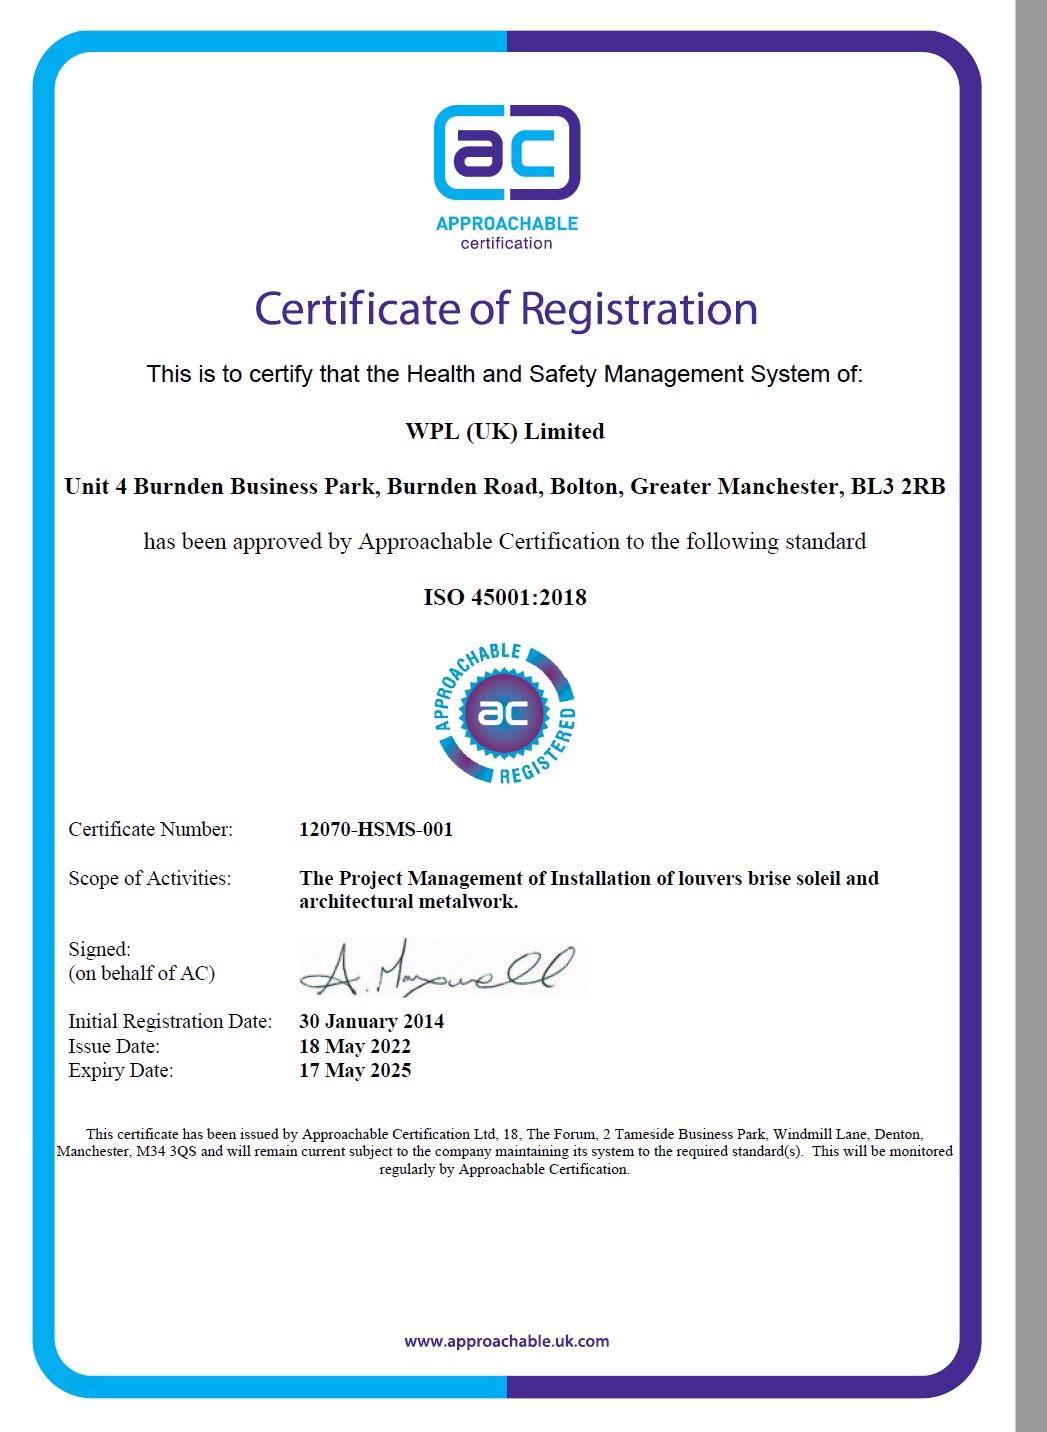 WPLUK ISO 45001 2018 Certification to 17th May 2025